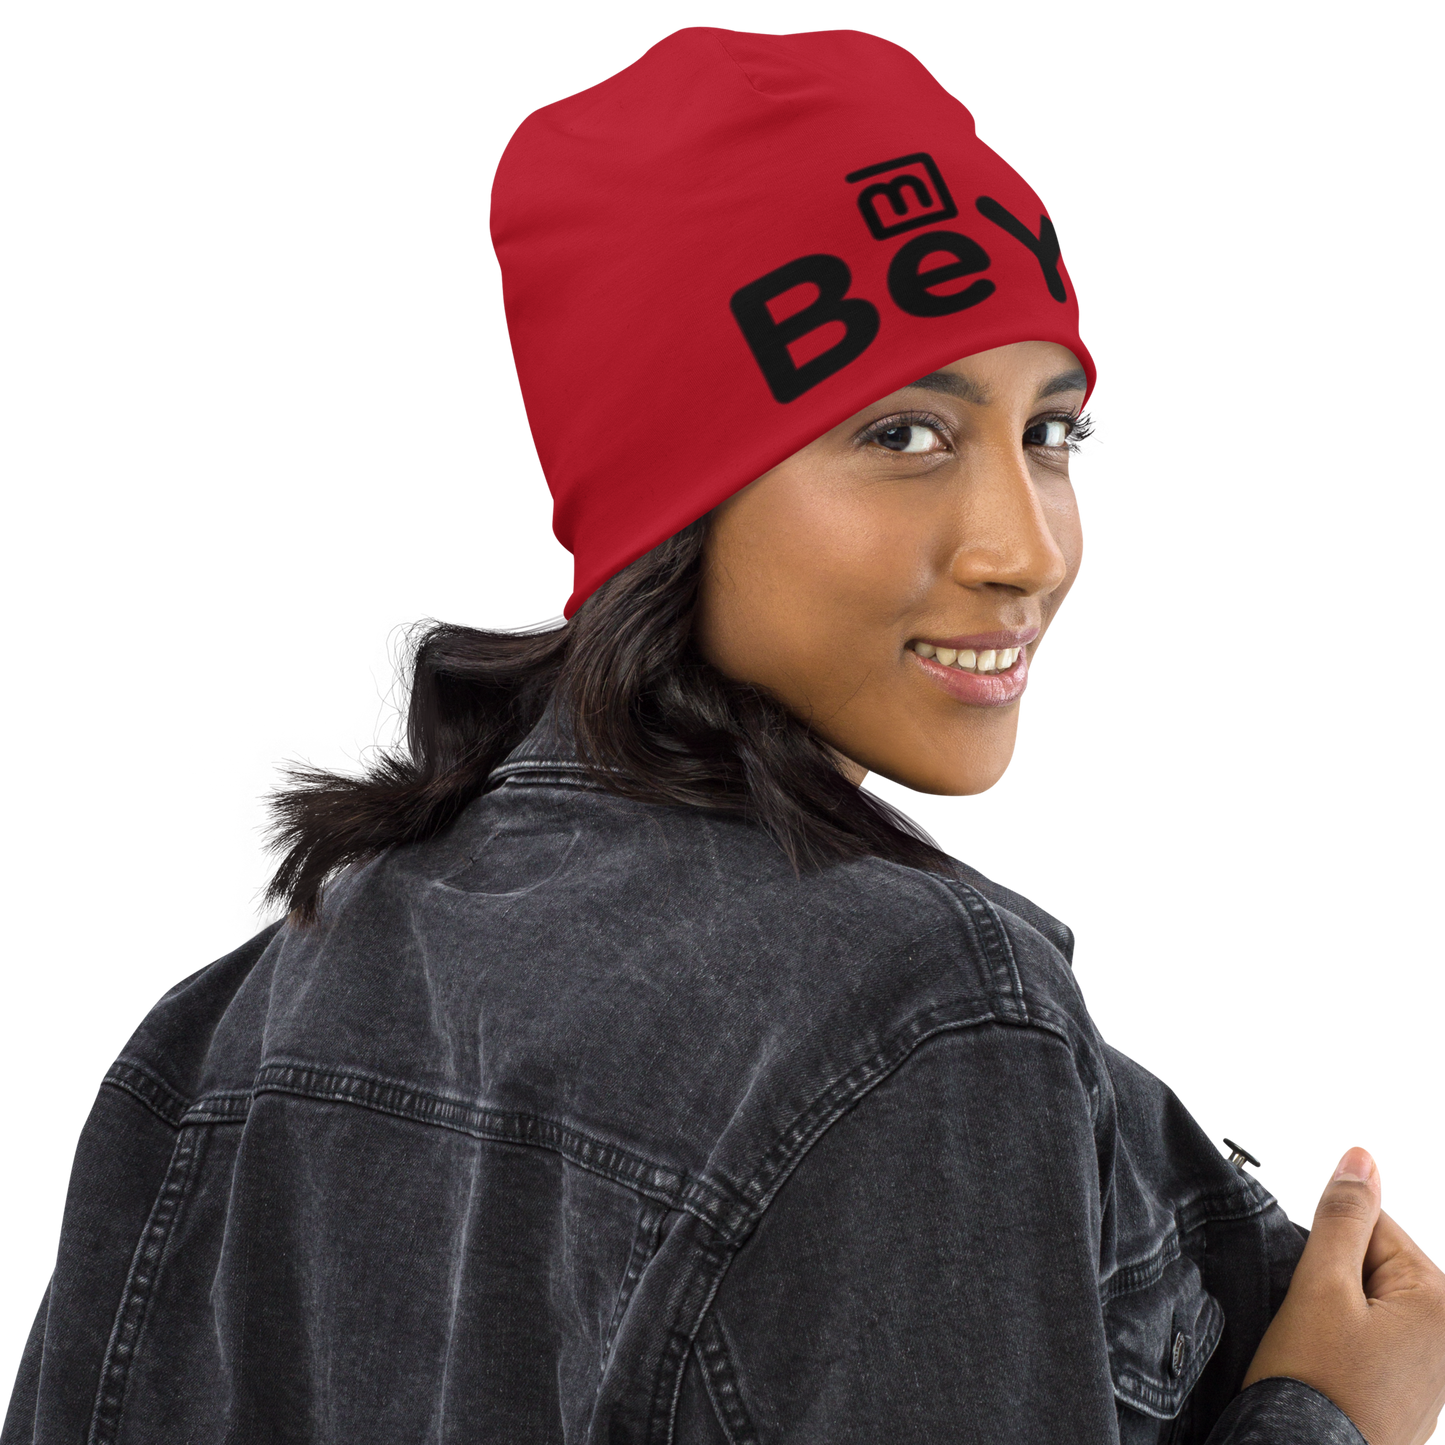 Red Casual Fit Unisex BeYou Beanie